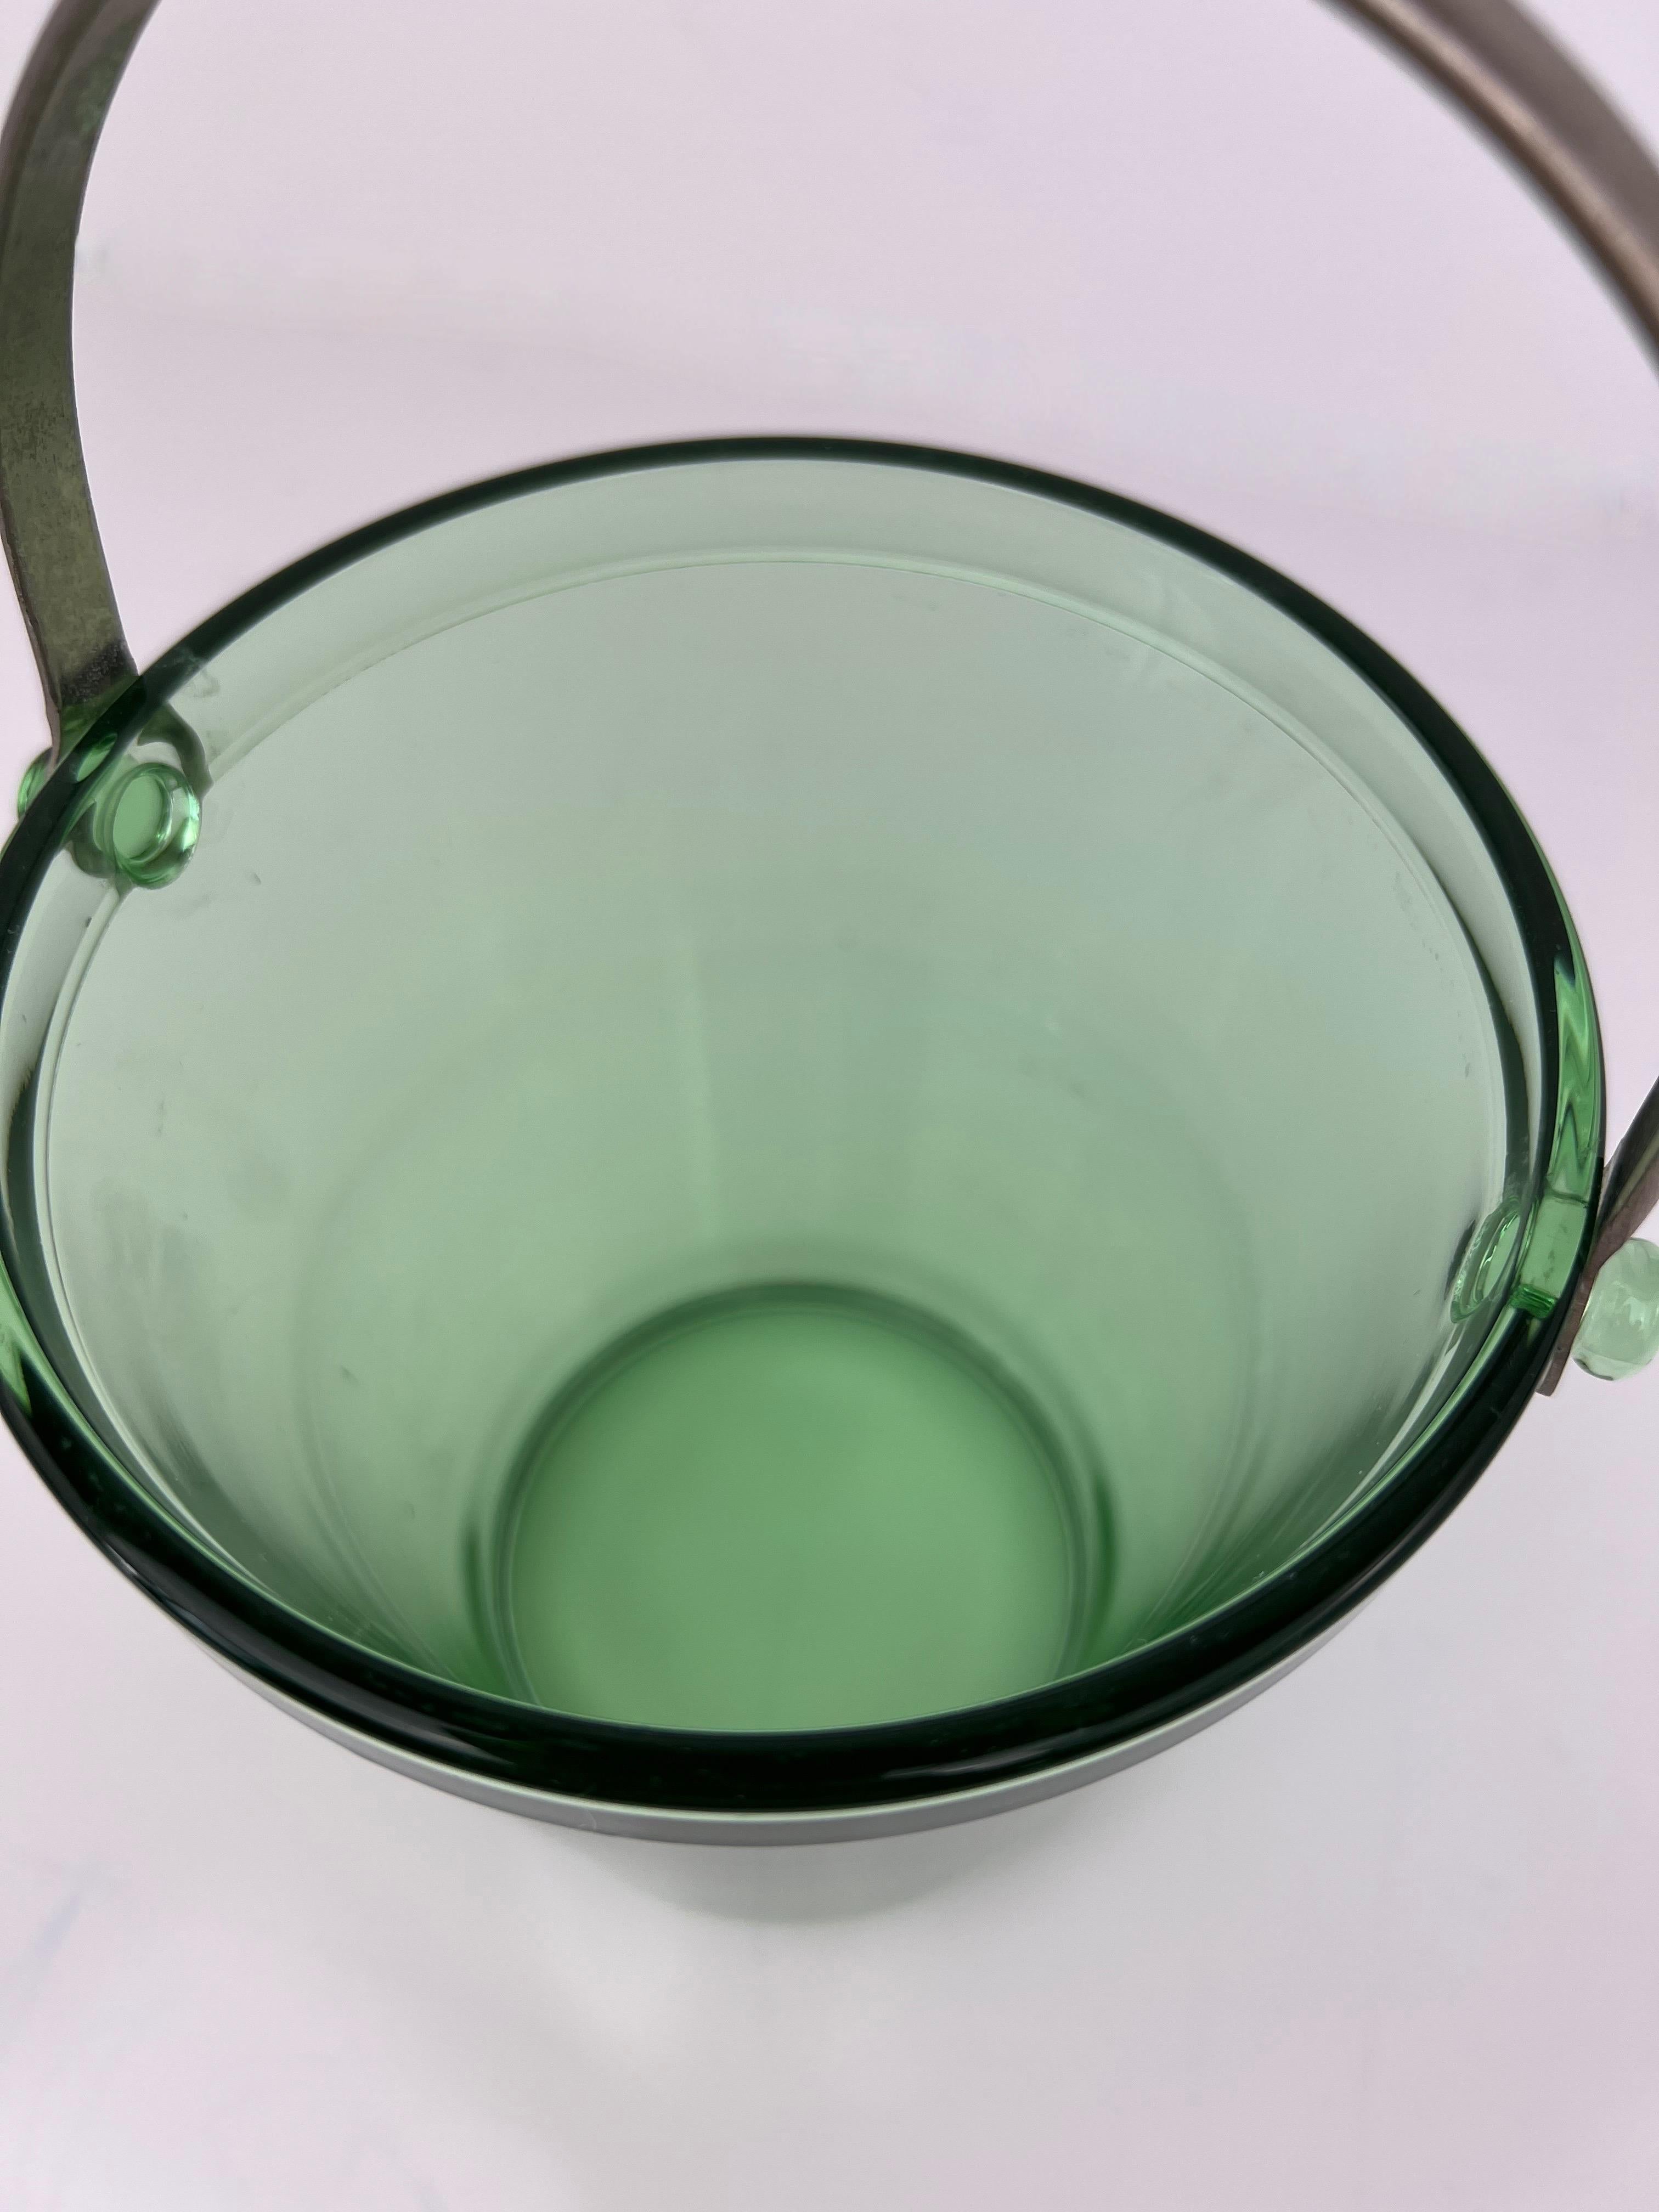 Mid Century Green Glass Ice Bucket with Stainless Handle. Petite size perfect for a bar cart.

5 15/16